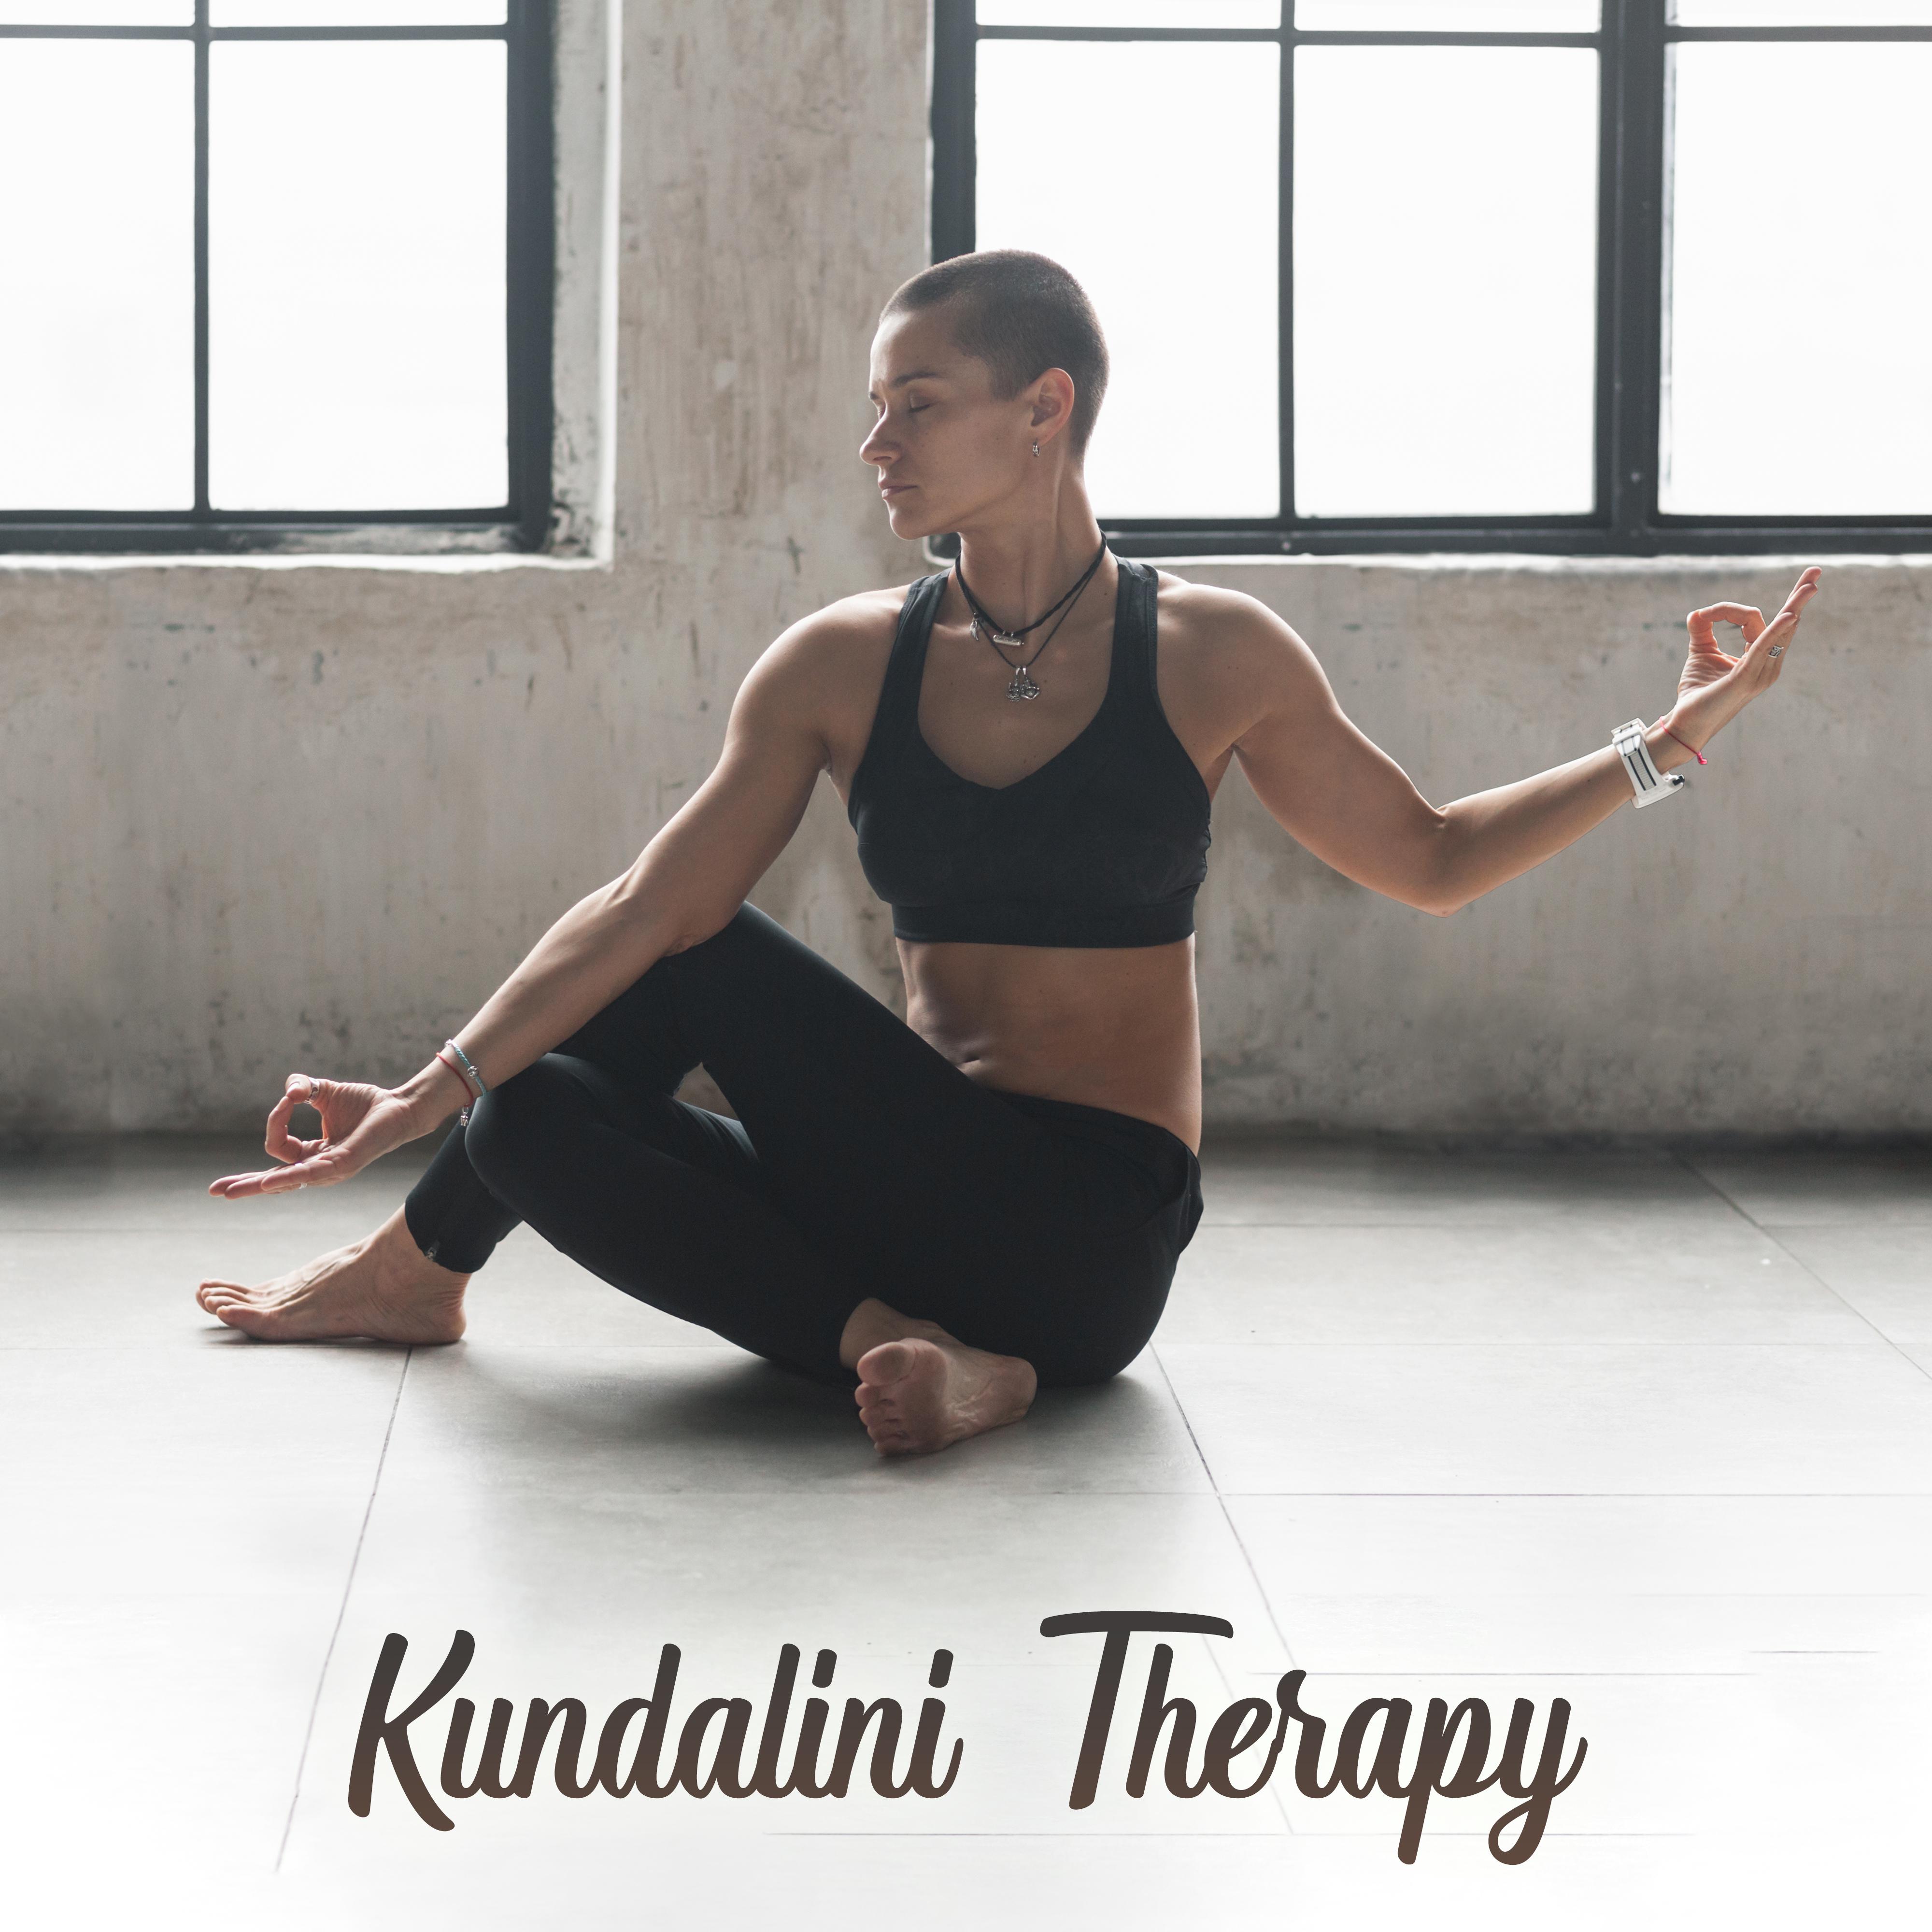 Kundalini Therapy - Music for Healing Through Yoga Practice and Deep Meditation